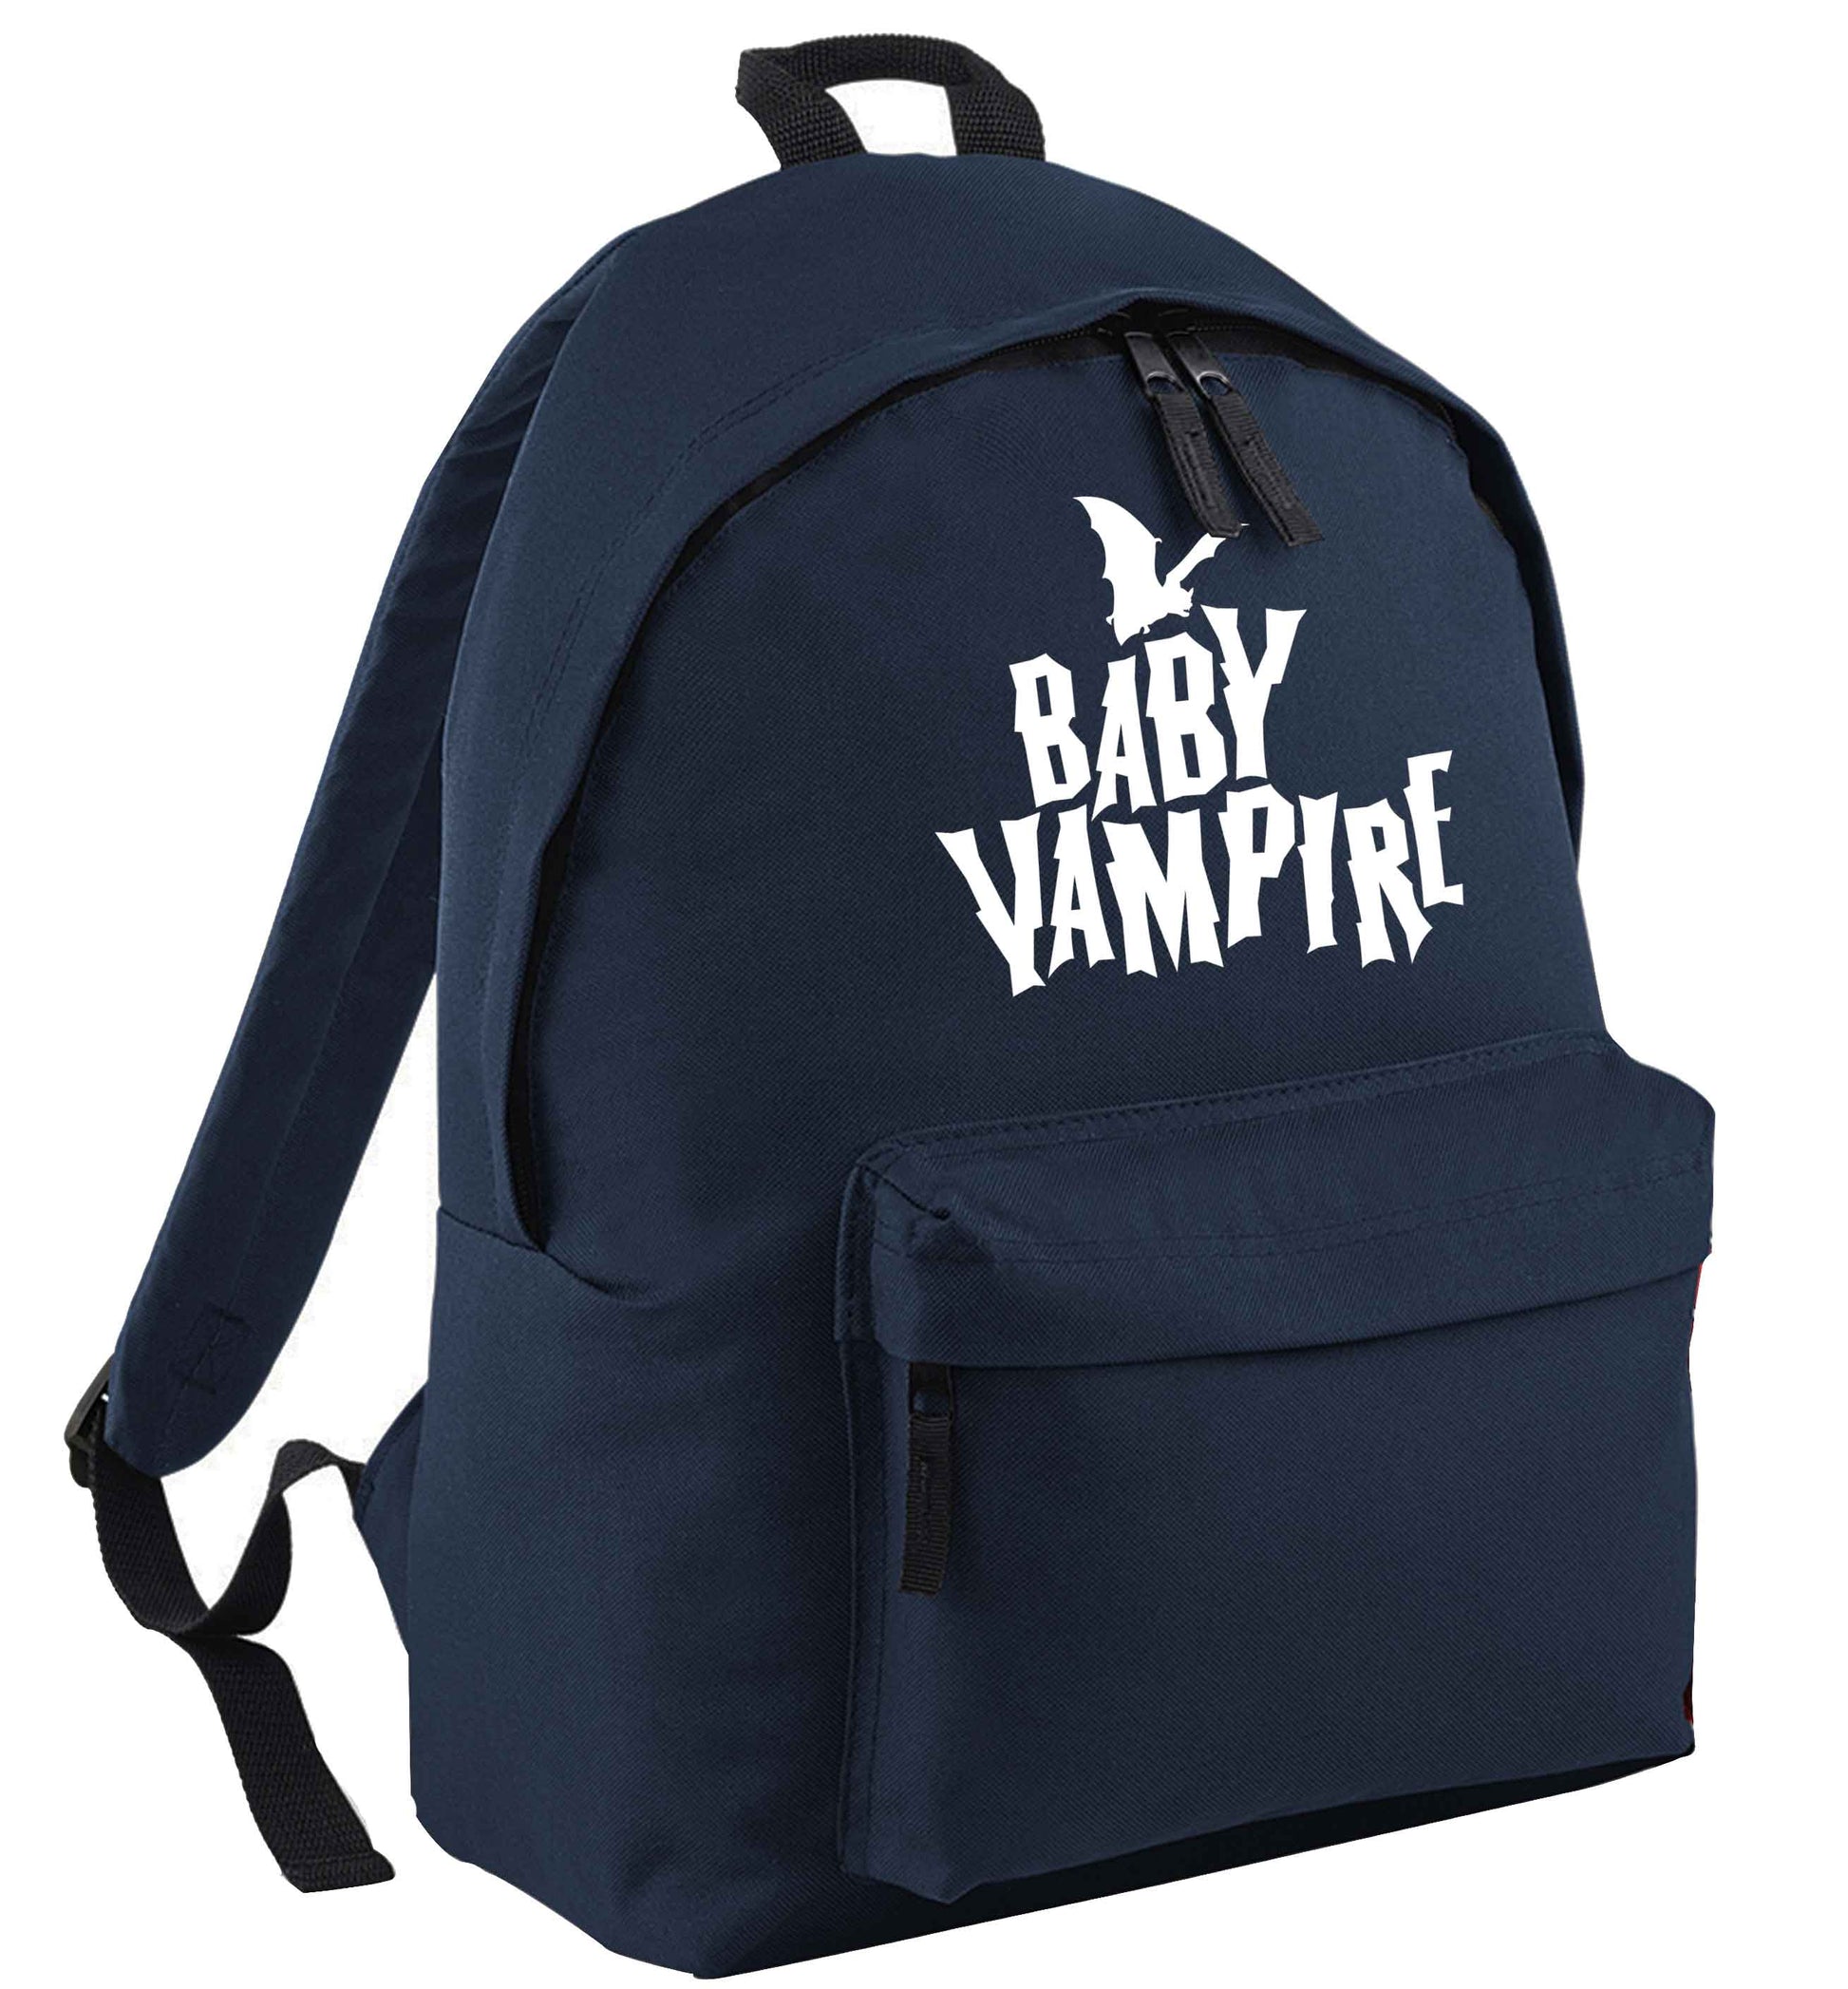 Baby vampire navy adults backpack